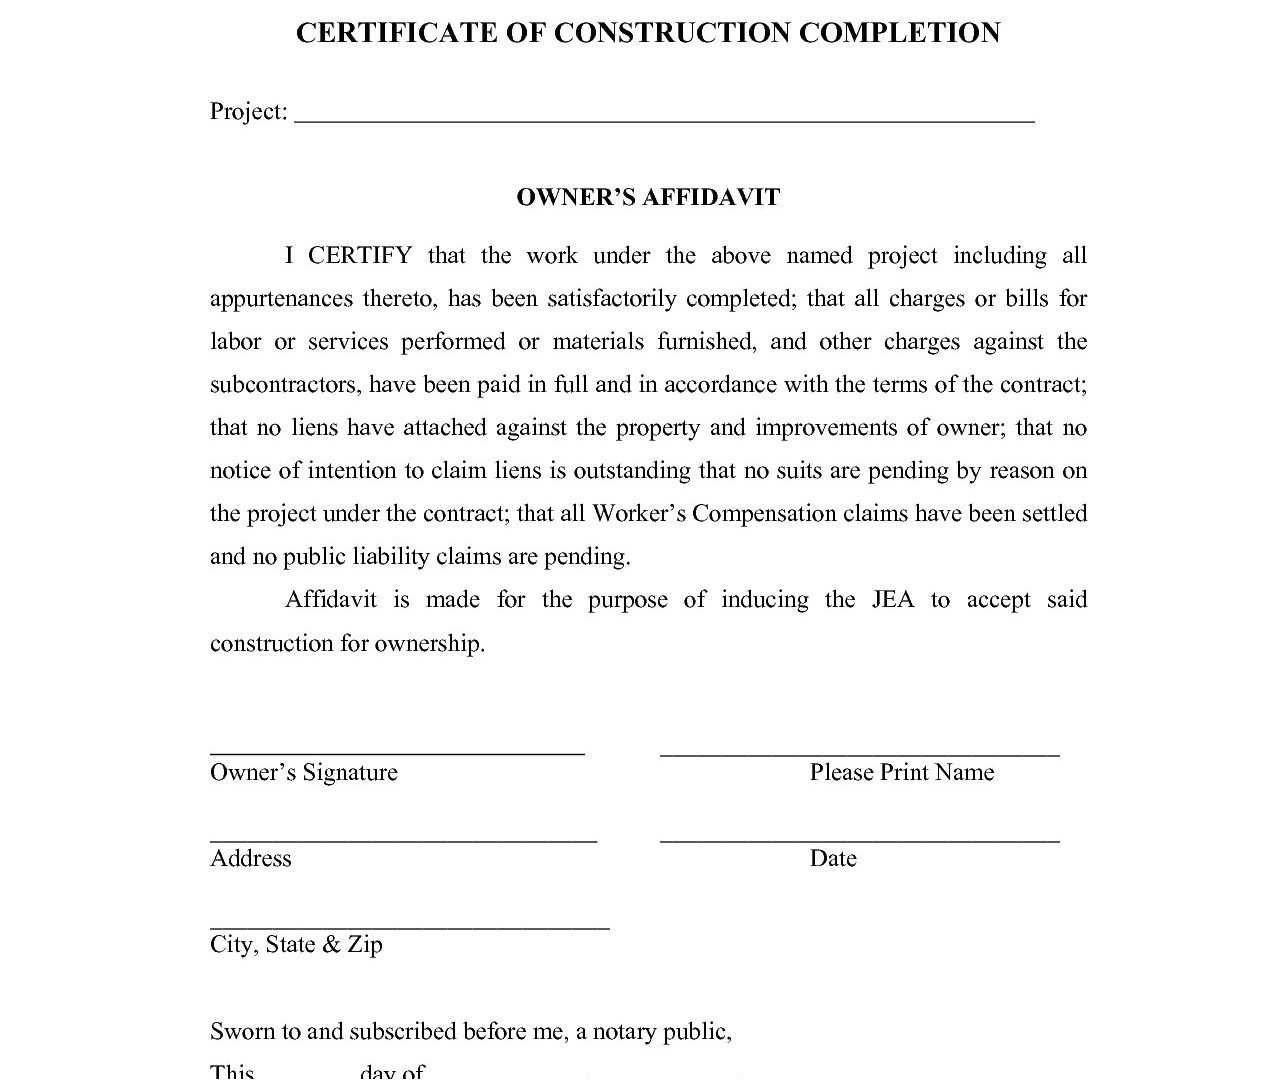 Work Completion Certificate Template – Falep.midnightpig.co Within Certificate Of Completion Construction Templates